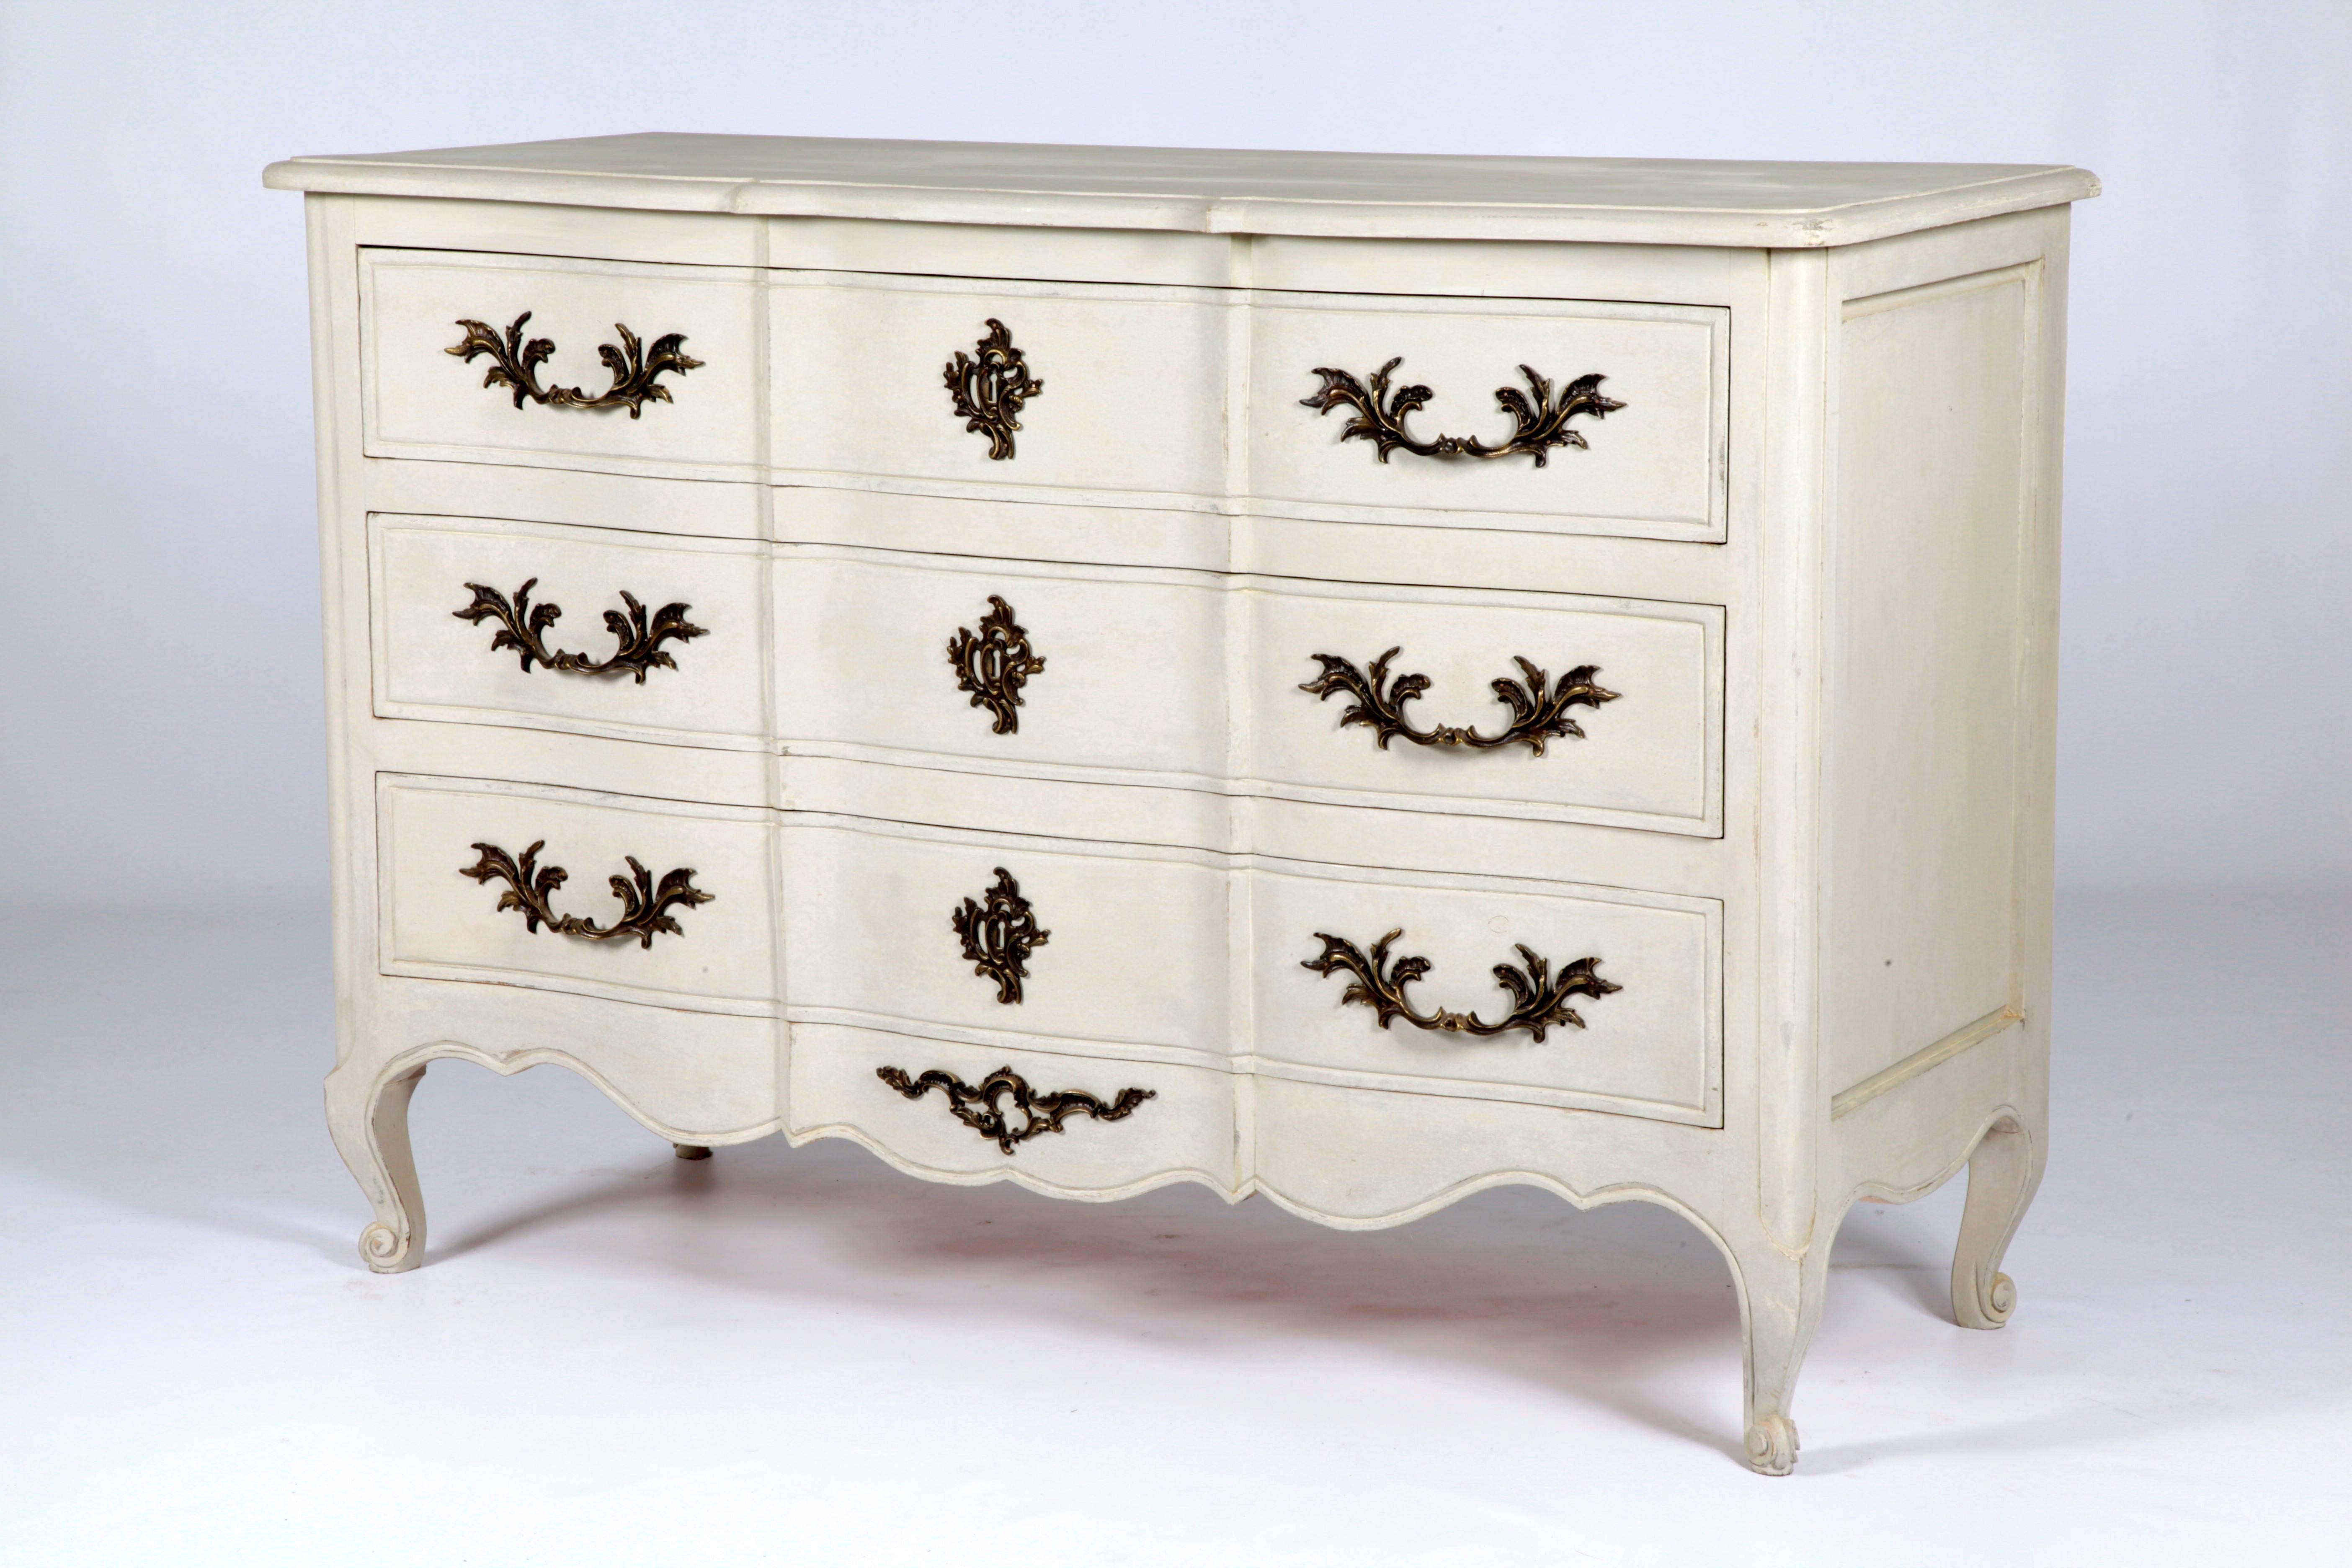 French Regence style chest of drawers handmade in solid wood with bronze ormolu mounts which have been treated to achieve an antique grey patina. The drawers are finished in a French grey patina which has been slightly aged and distressed.